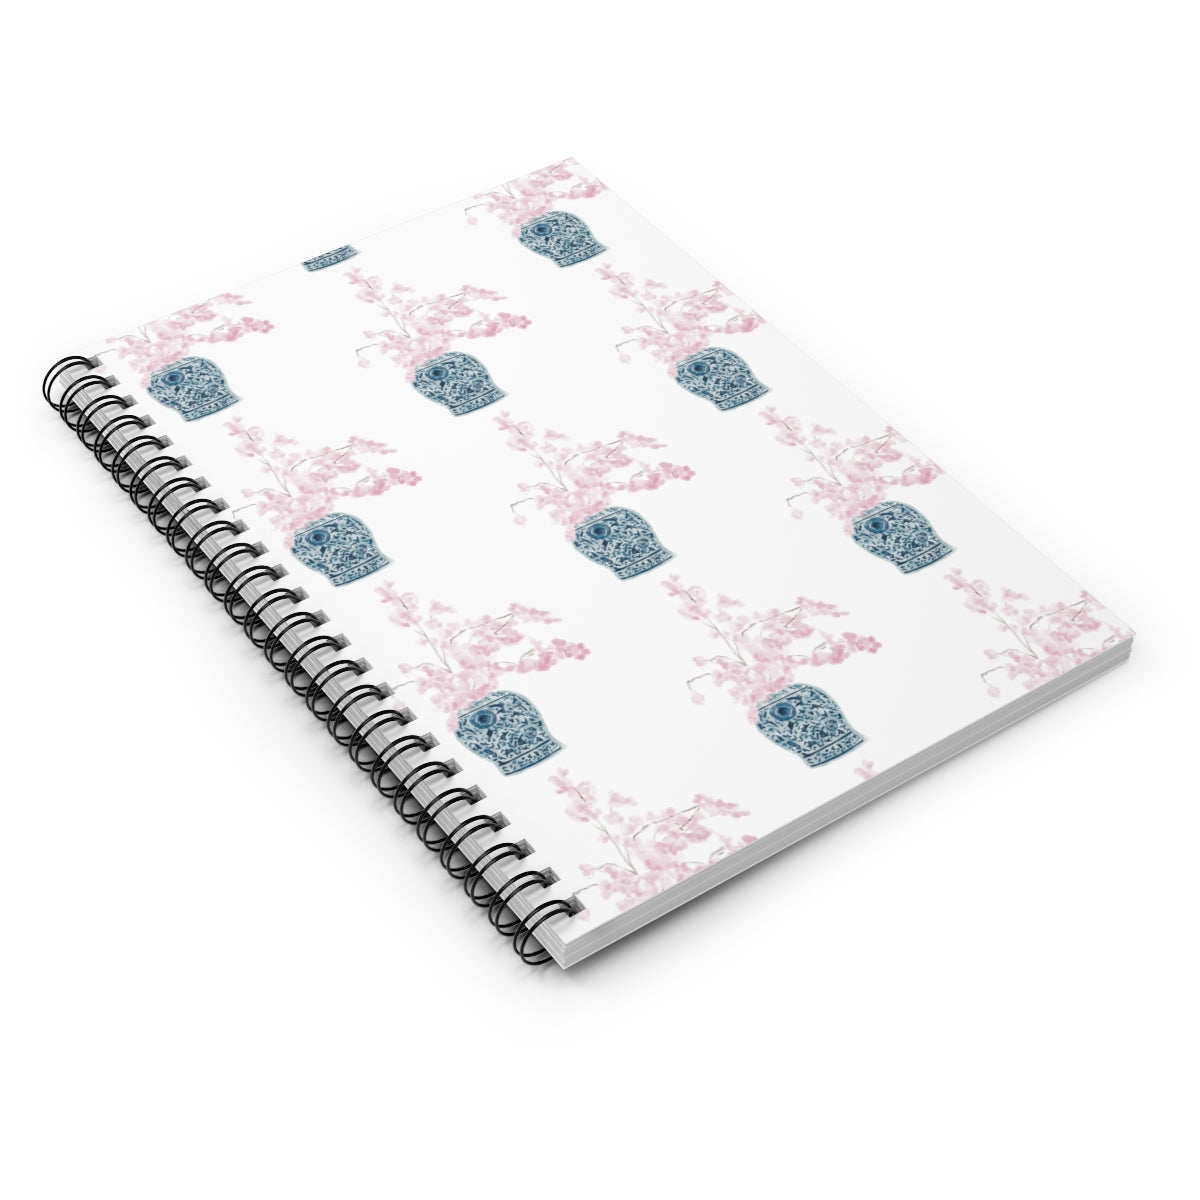 VASE WITH PINK FLOWERS NOTEBOOK - BRYKNOLO LLC Paper products